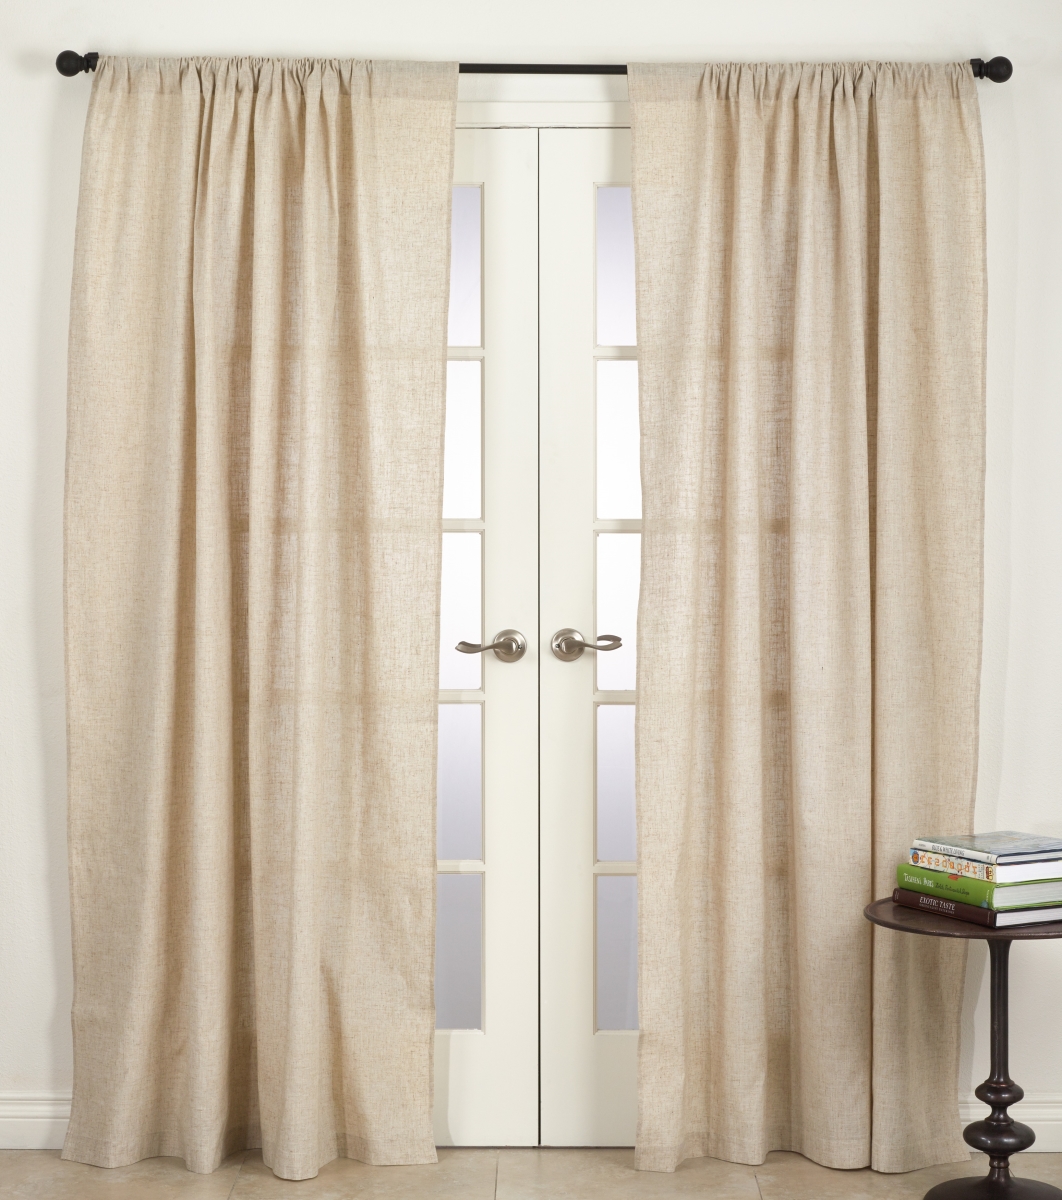 731.n5784 57 X 84 In. Classic Linen Blend Curtain Panel - Natural